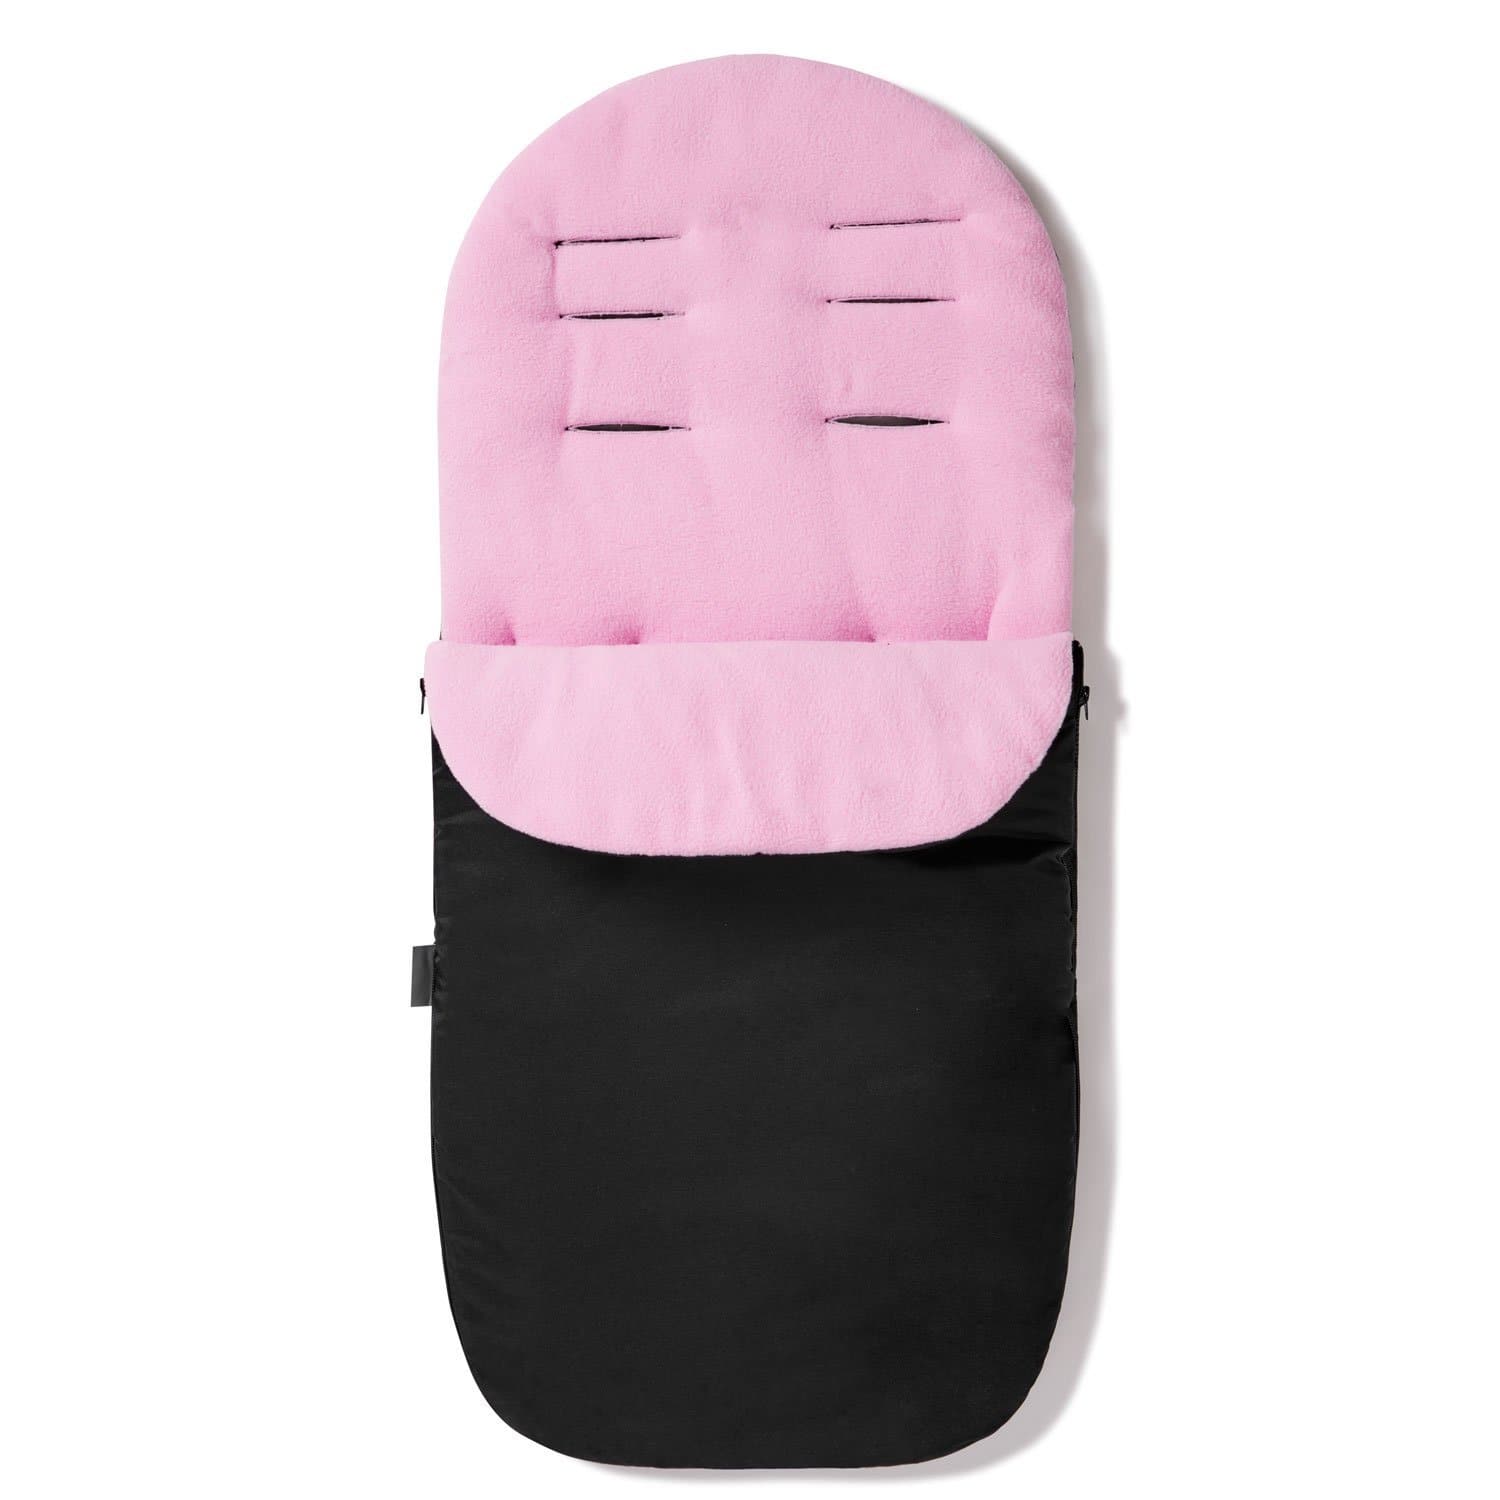 Footmuff / Cosy Toes Compatible with Babylo - Light Pink / Fits All Models | For Your Little One